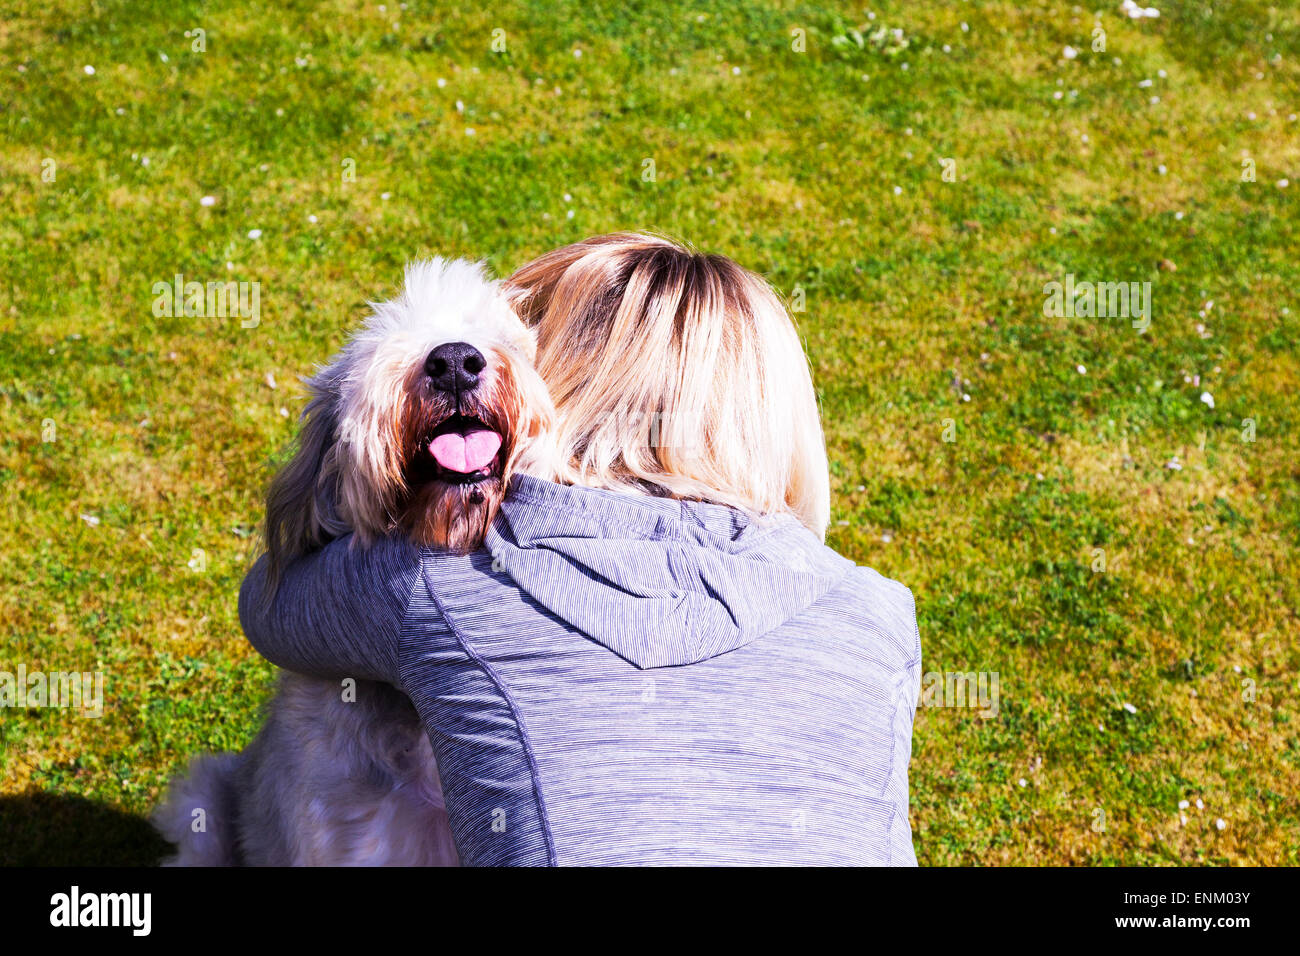 hugging dog affection for pet canine love loving cuddle cuddling unconditional loves dogs pets woman girl lady Stock Photo